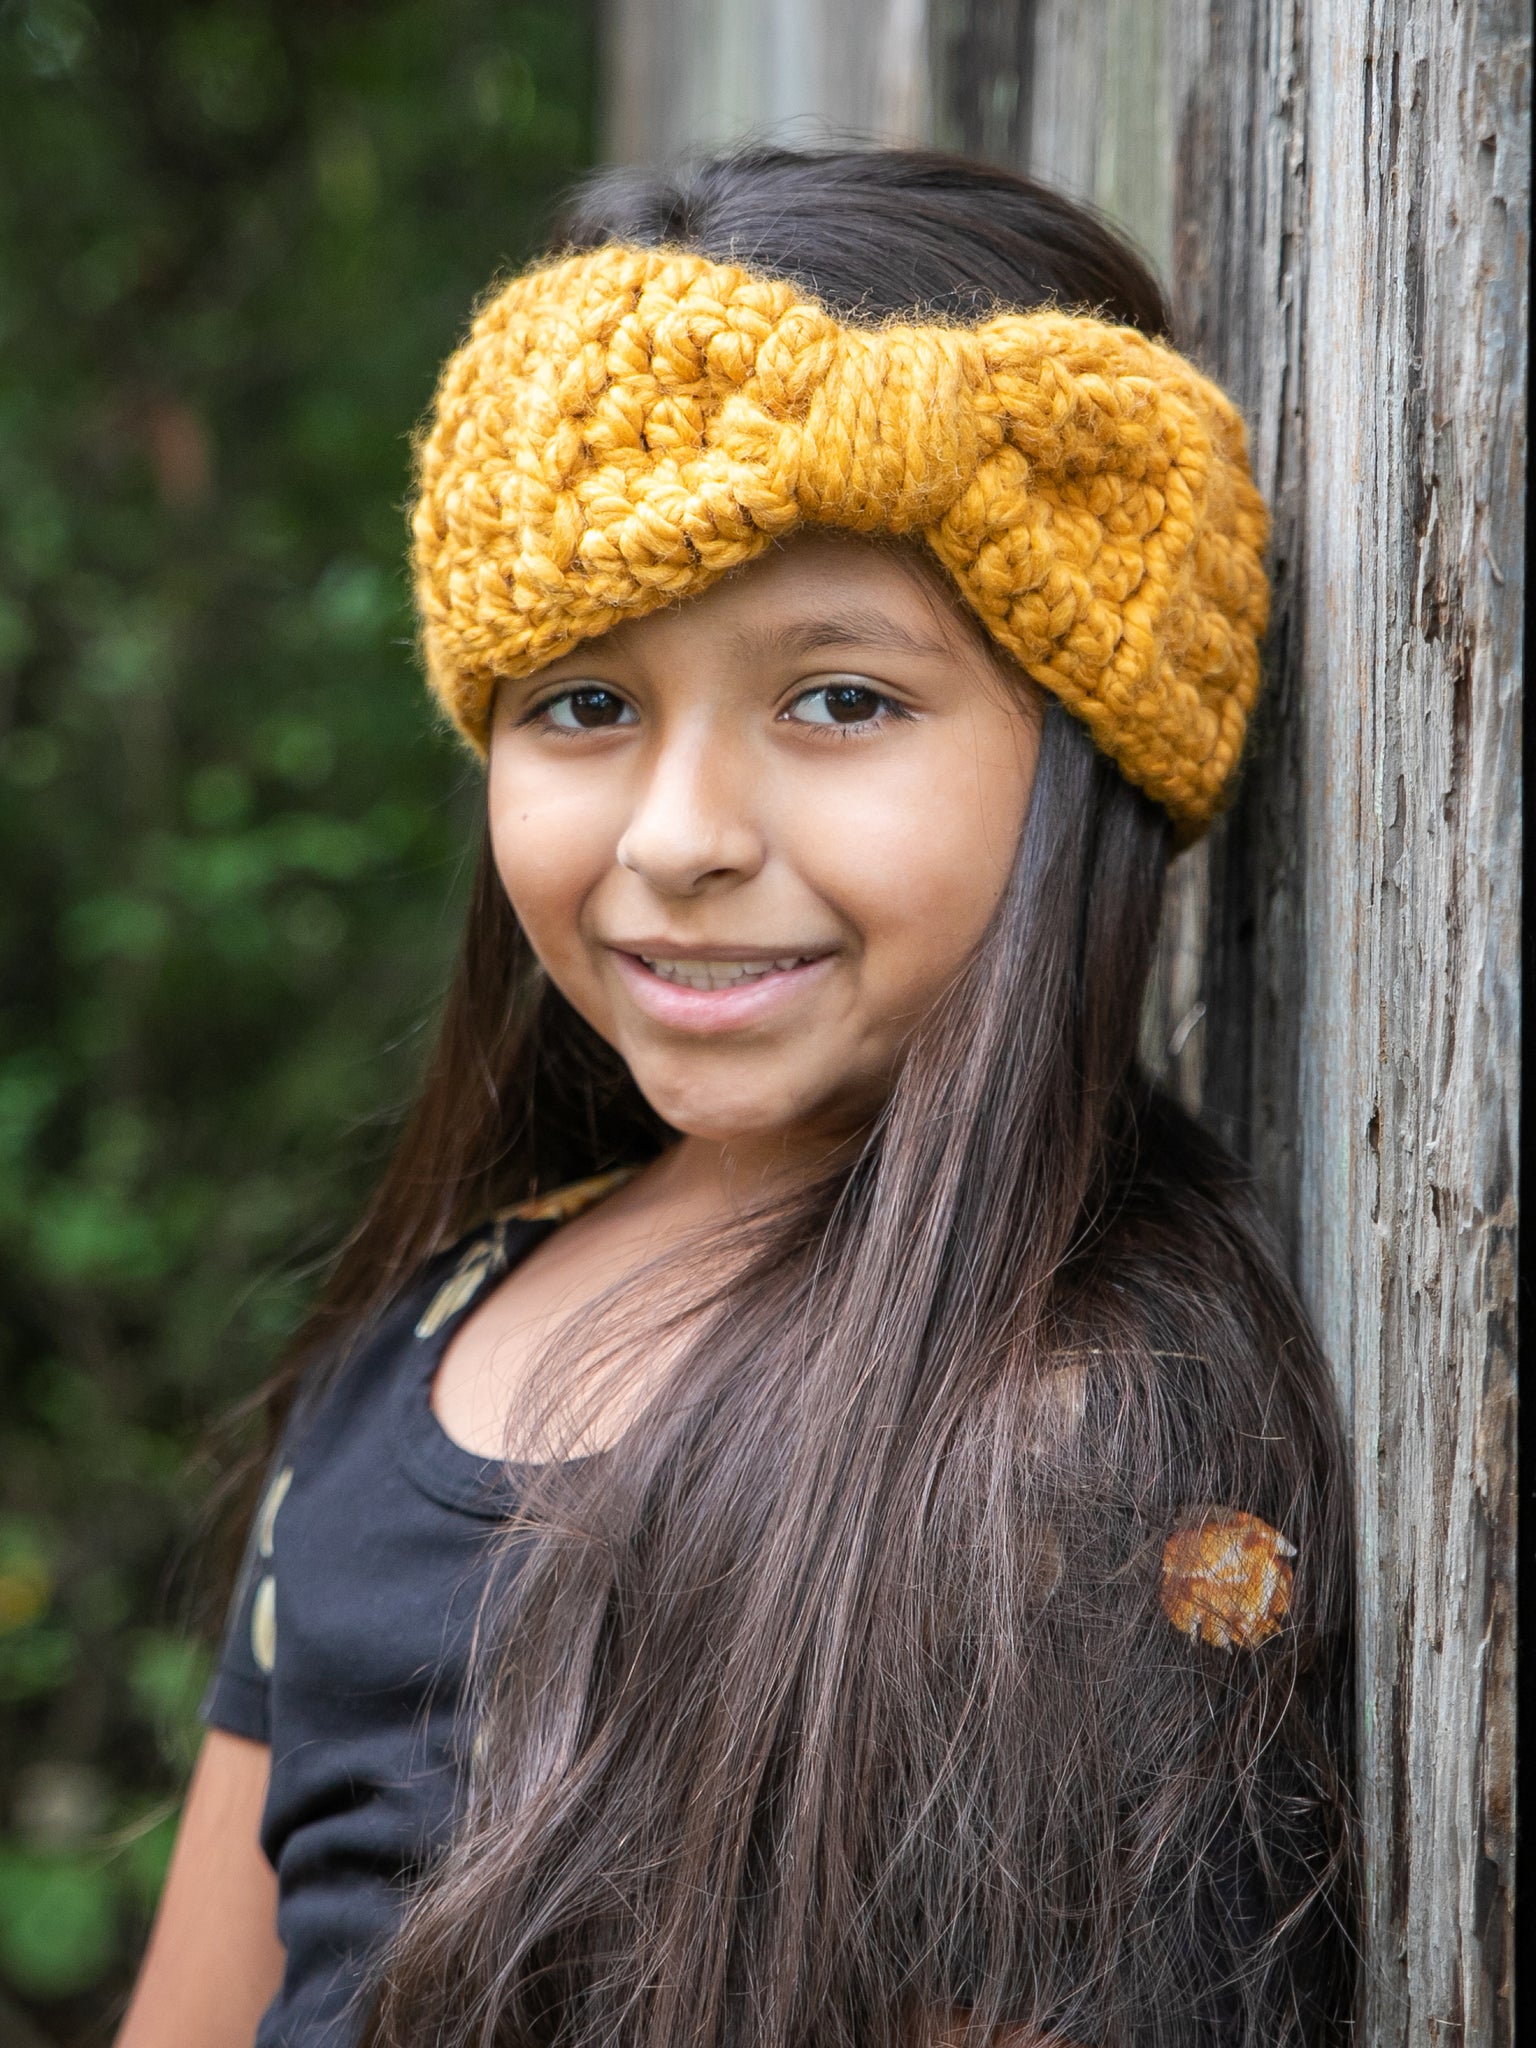 Mustard knotted bow winter headband by Two Seaside Babes